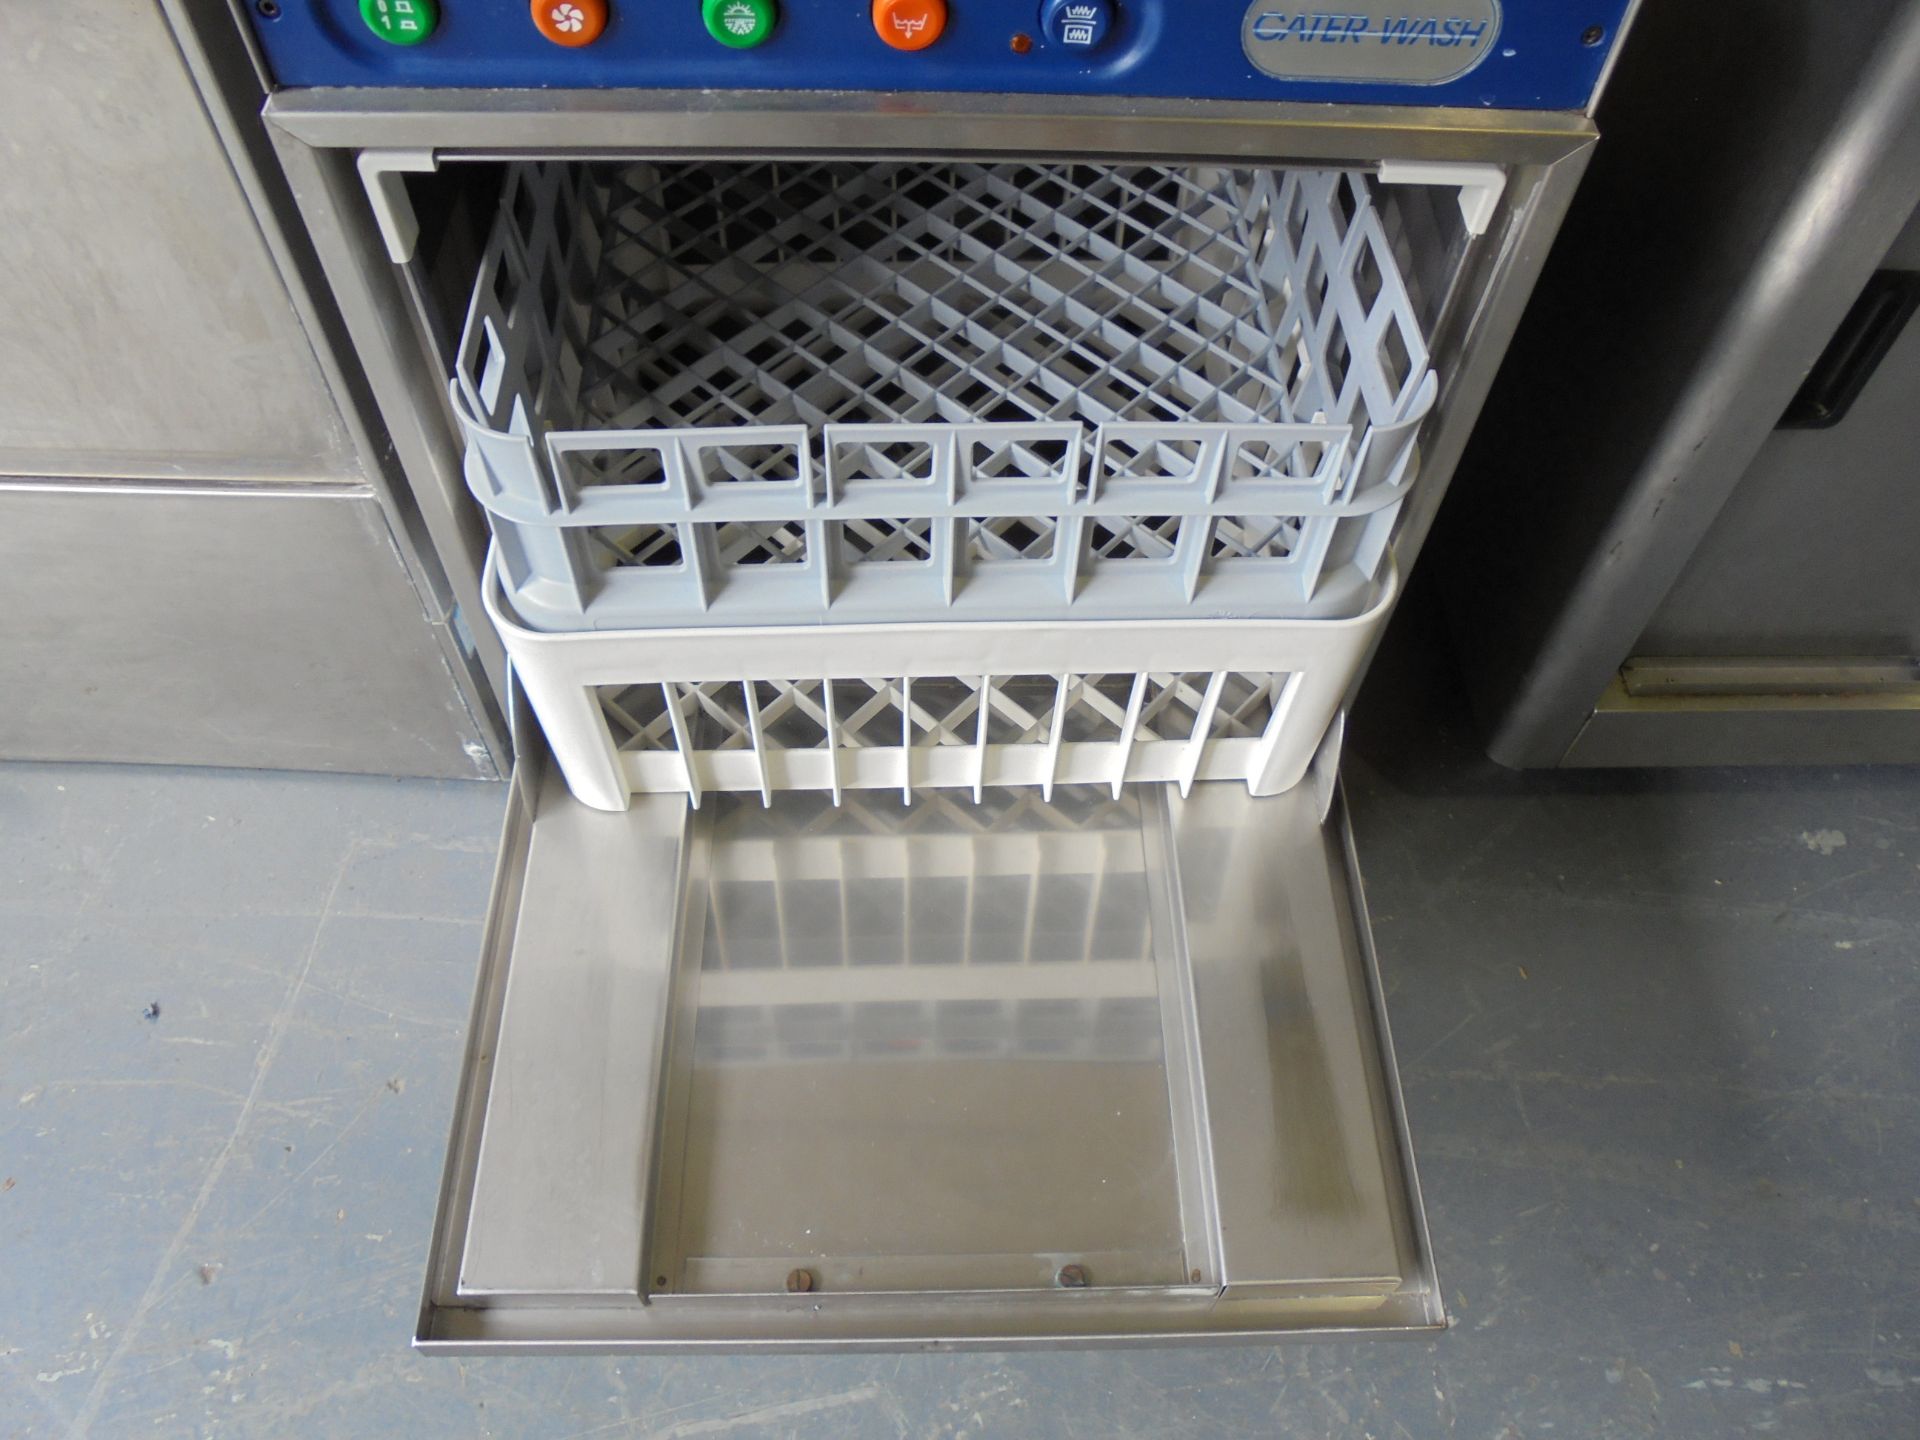 Cater Wash Glass Washer, Model CK40/PS. Size (H) 75cm x (D) 50cm x (W) 47cm . Comes with 2 Plastic